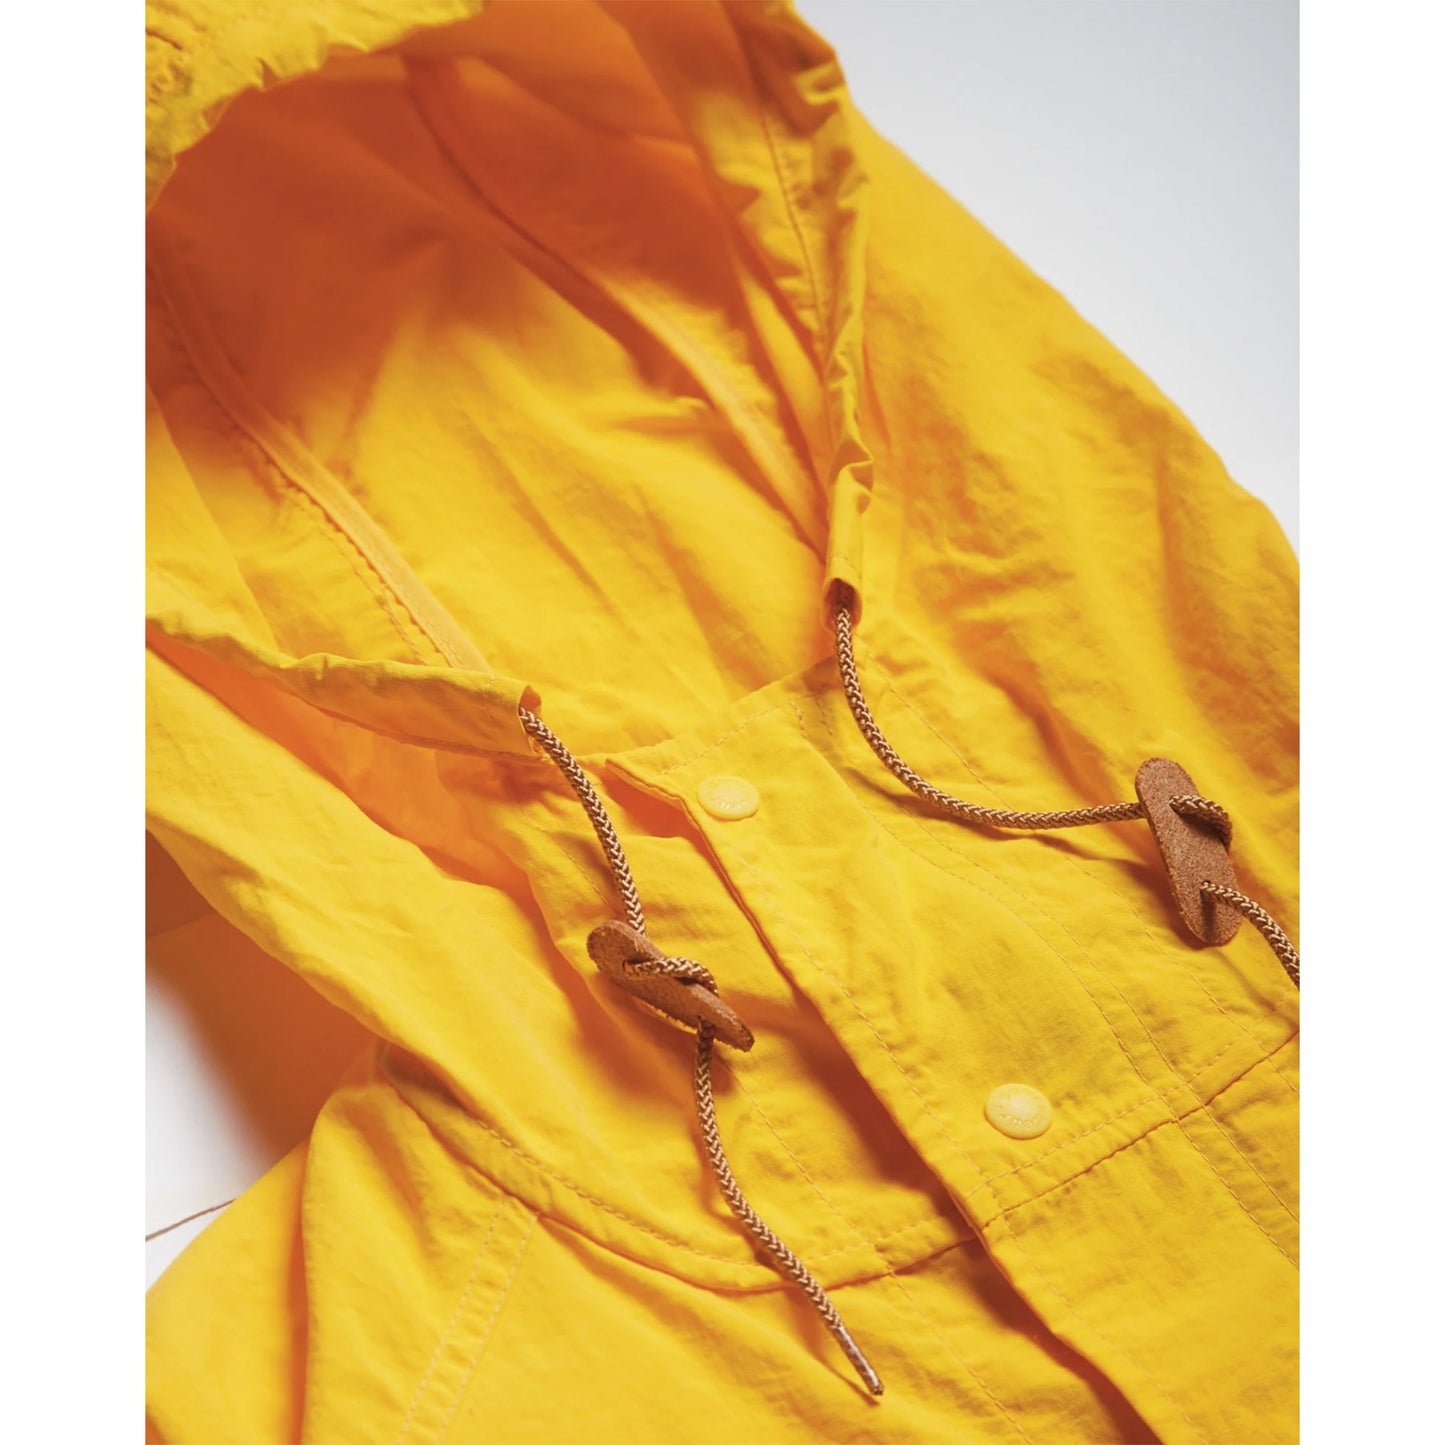 Light Shell Parka in Yellow